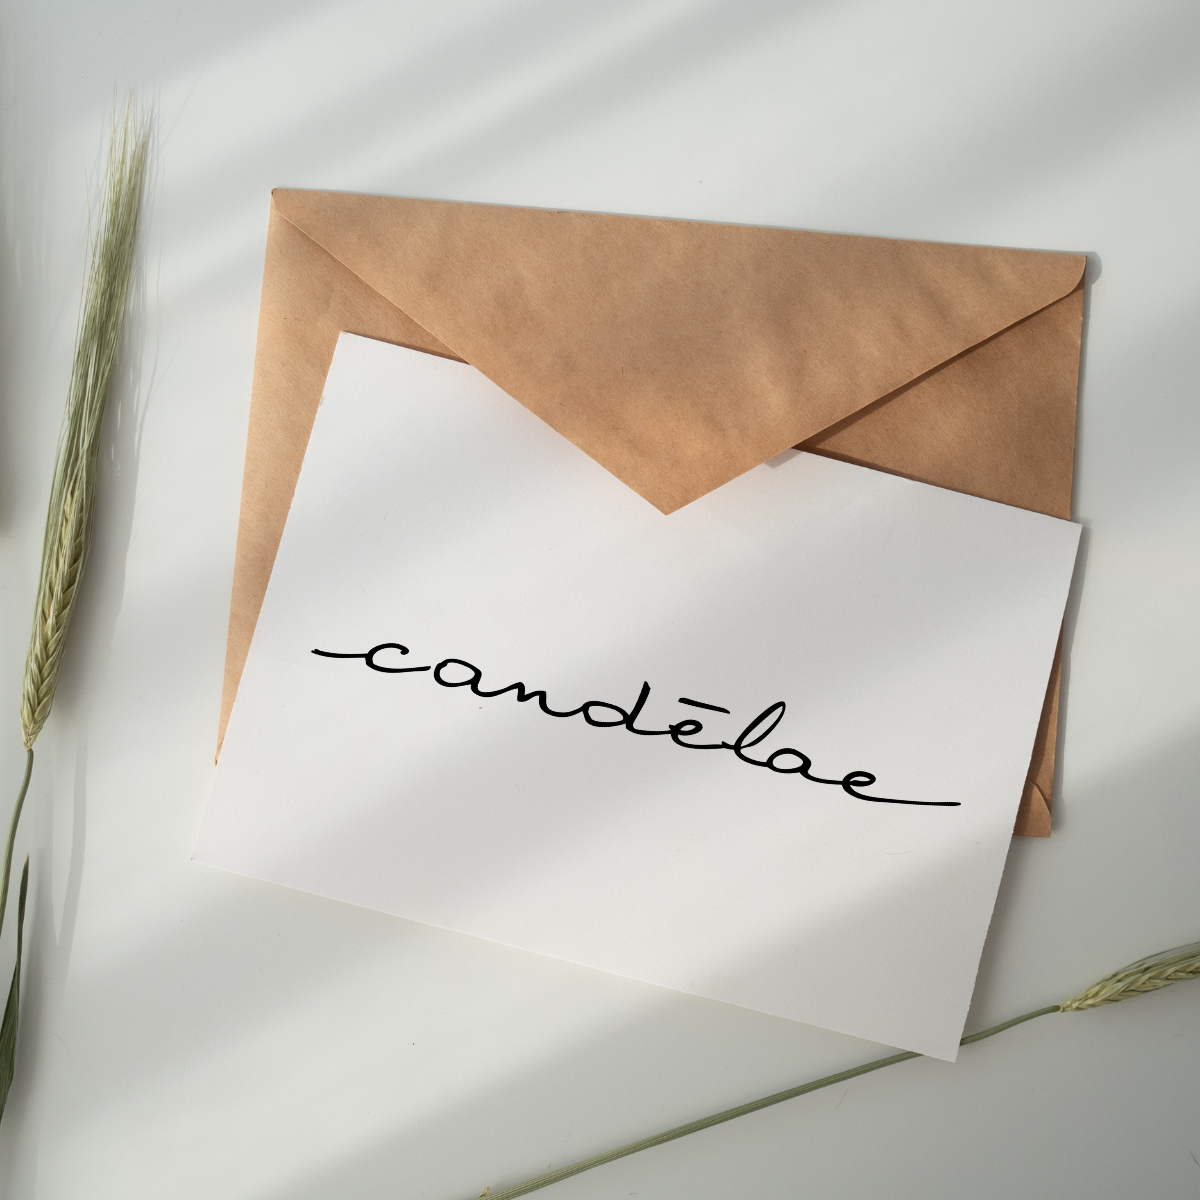 The gift card is illustrated by having a white rectangle paper displaying the logo of candēlae on top of a brown envelop 